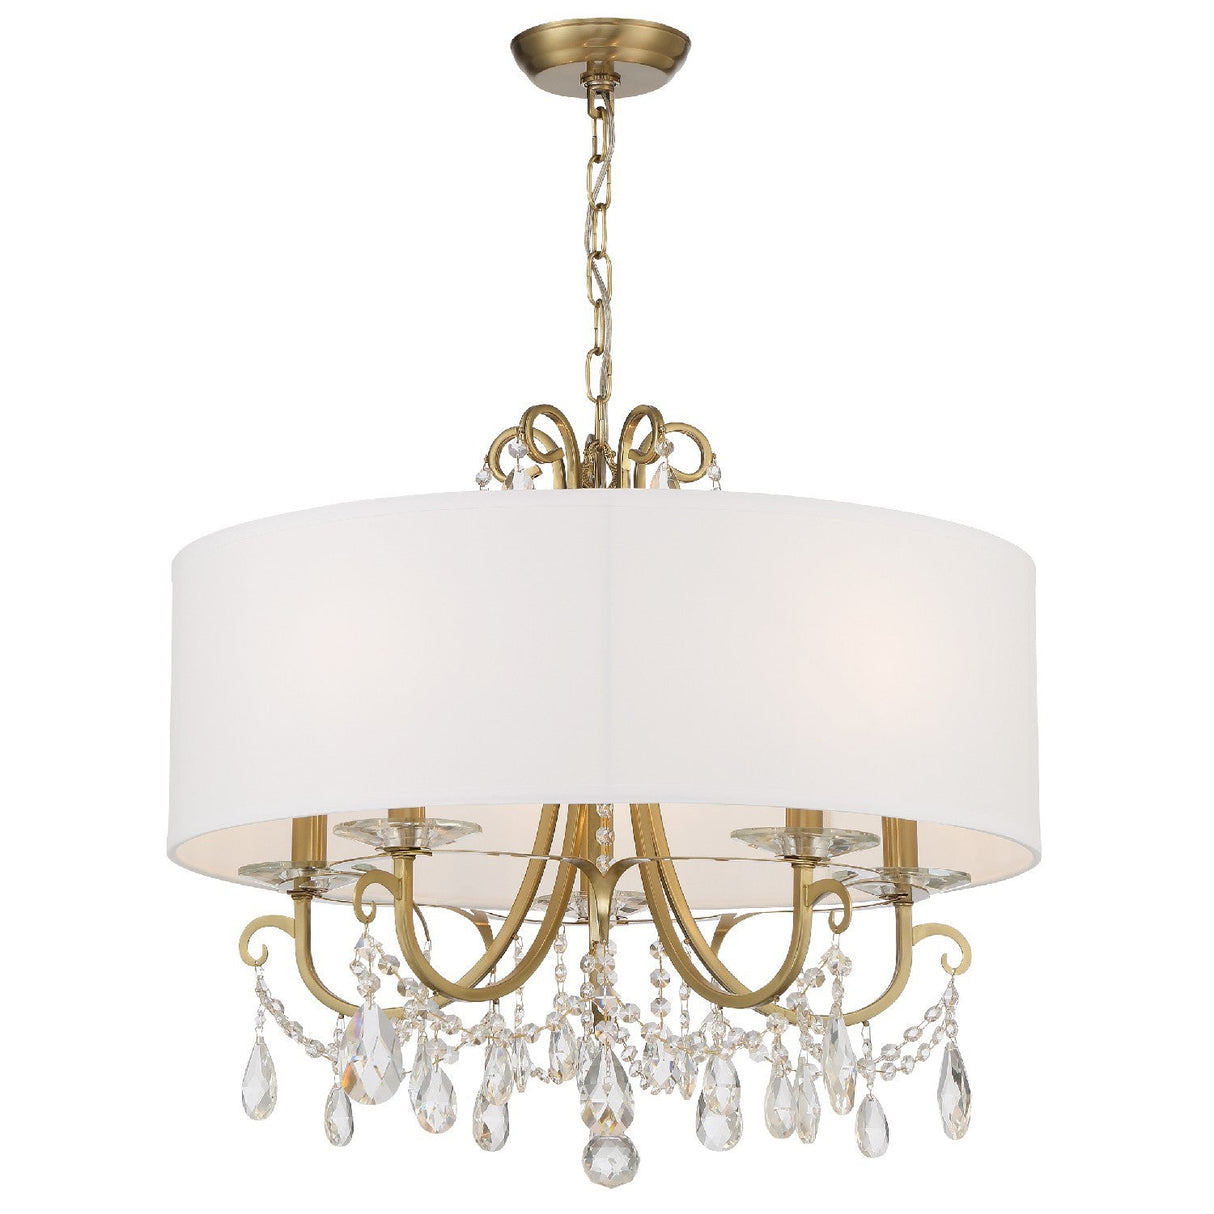 Othello 5 Light Spectra Crystal Vibrant Gold Chandelier 6625-VG-CL-SAQ